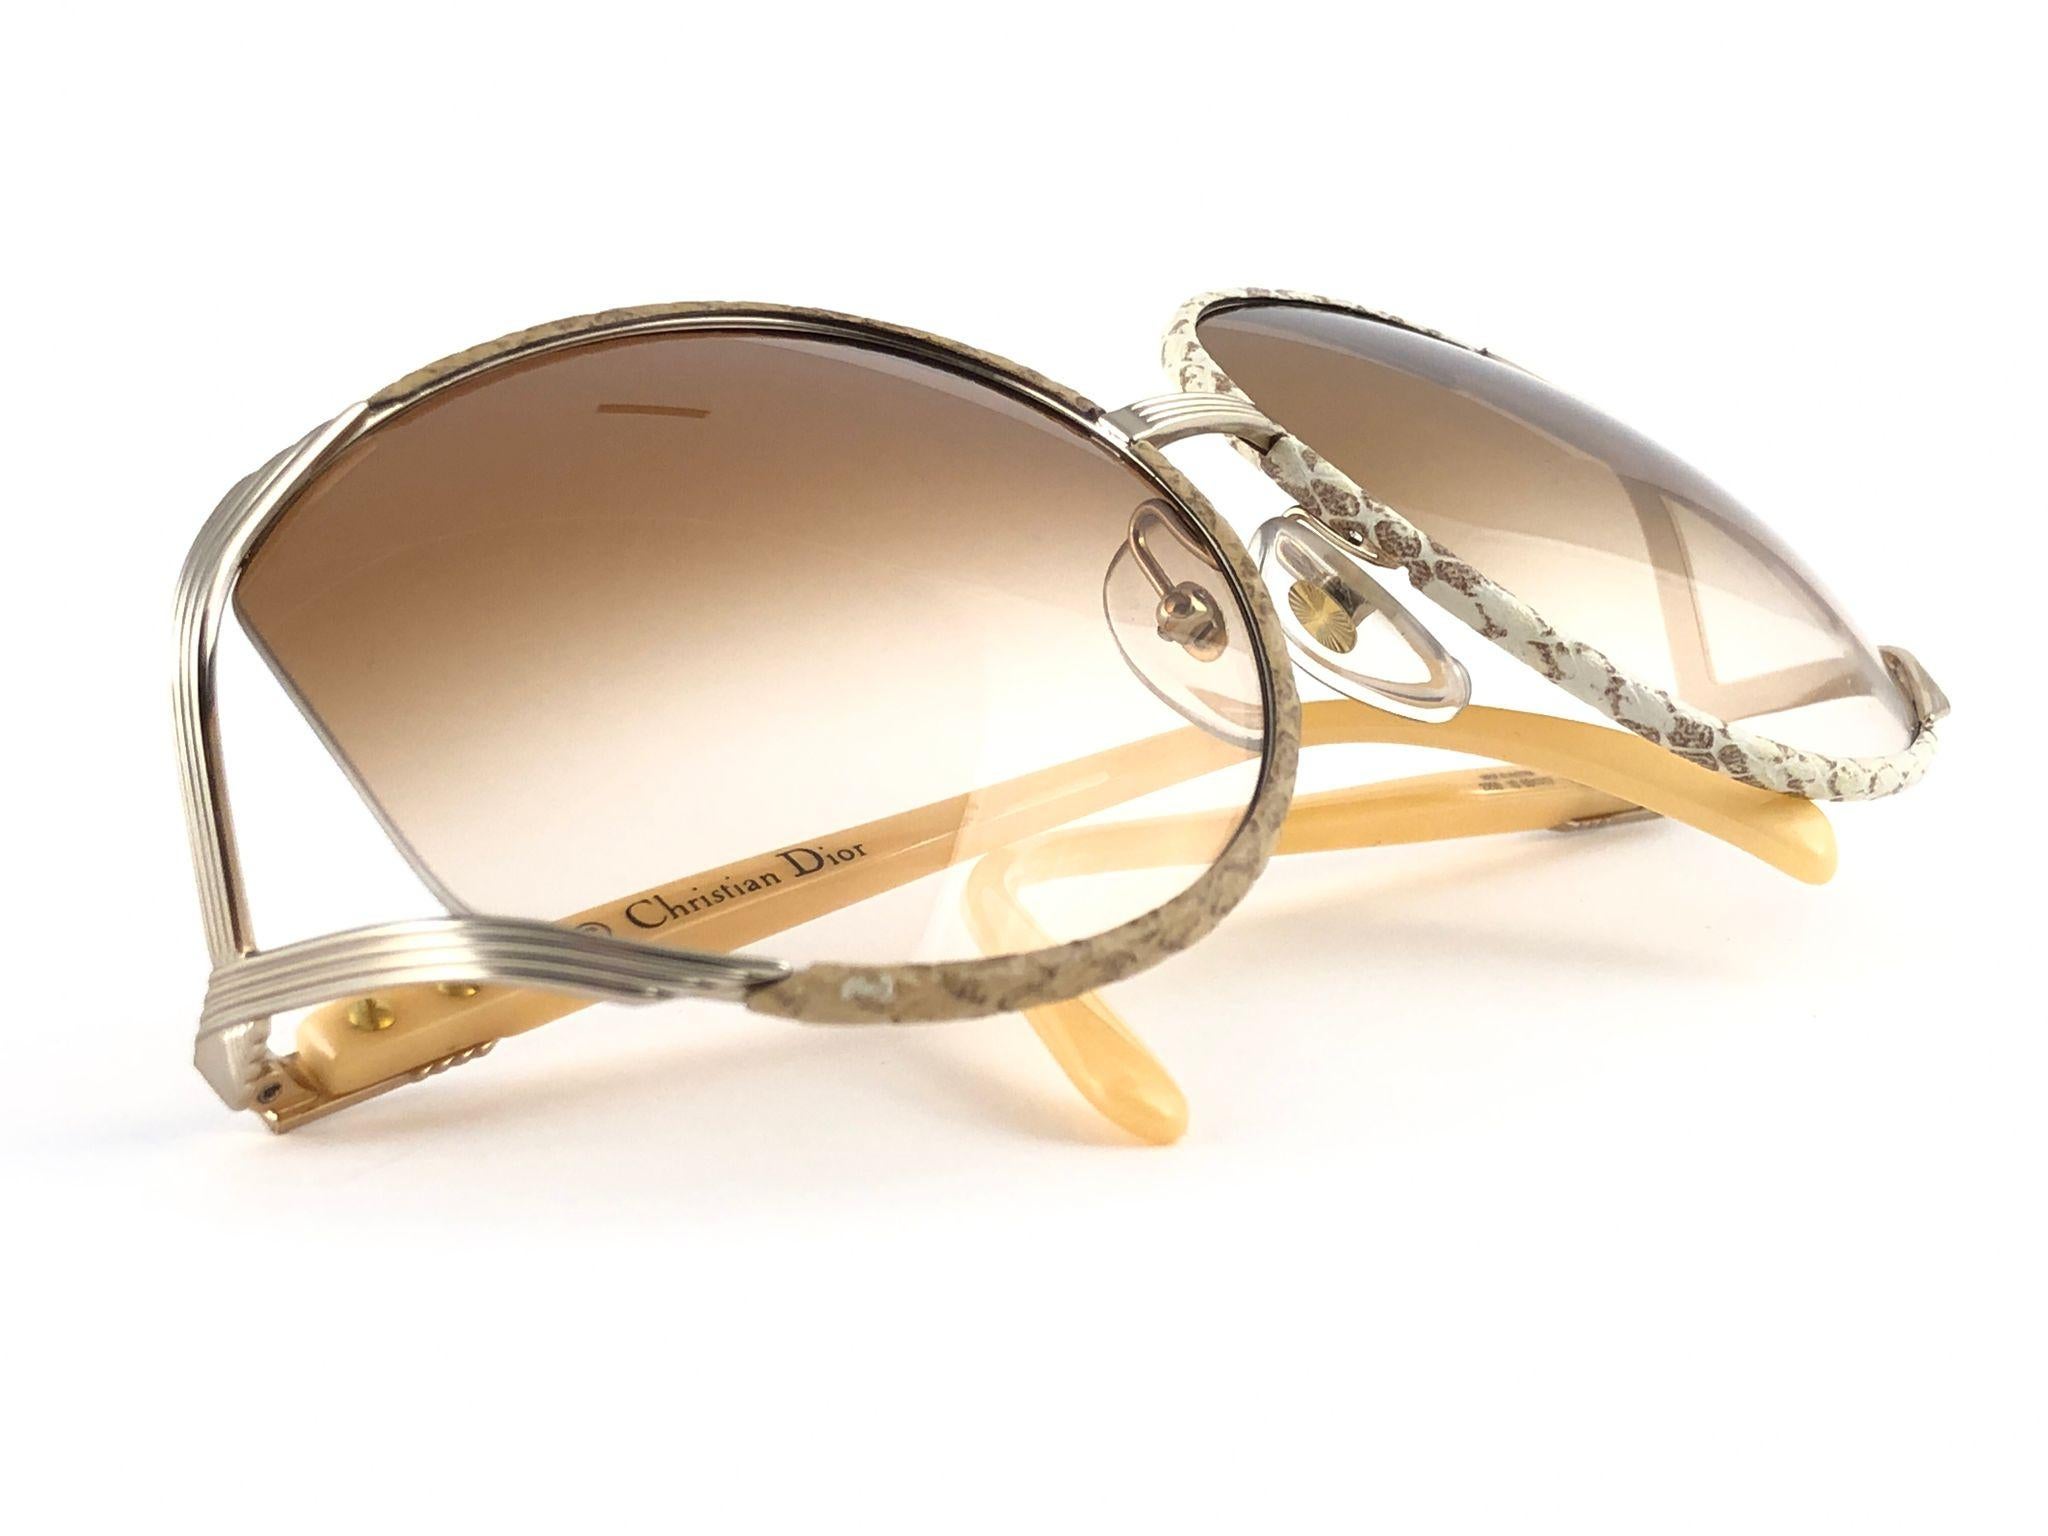 New Vintage Christian Dior 2250 Oversized Python Lined Sunglasses  For Sale 2